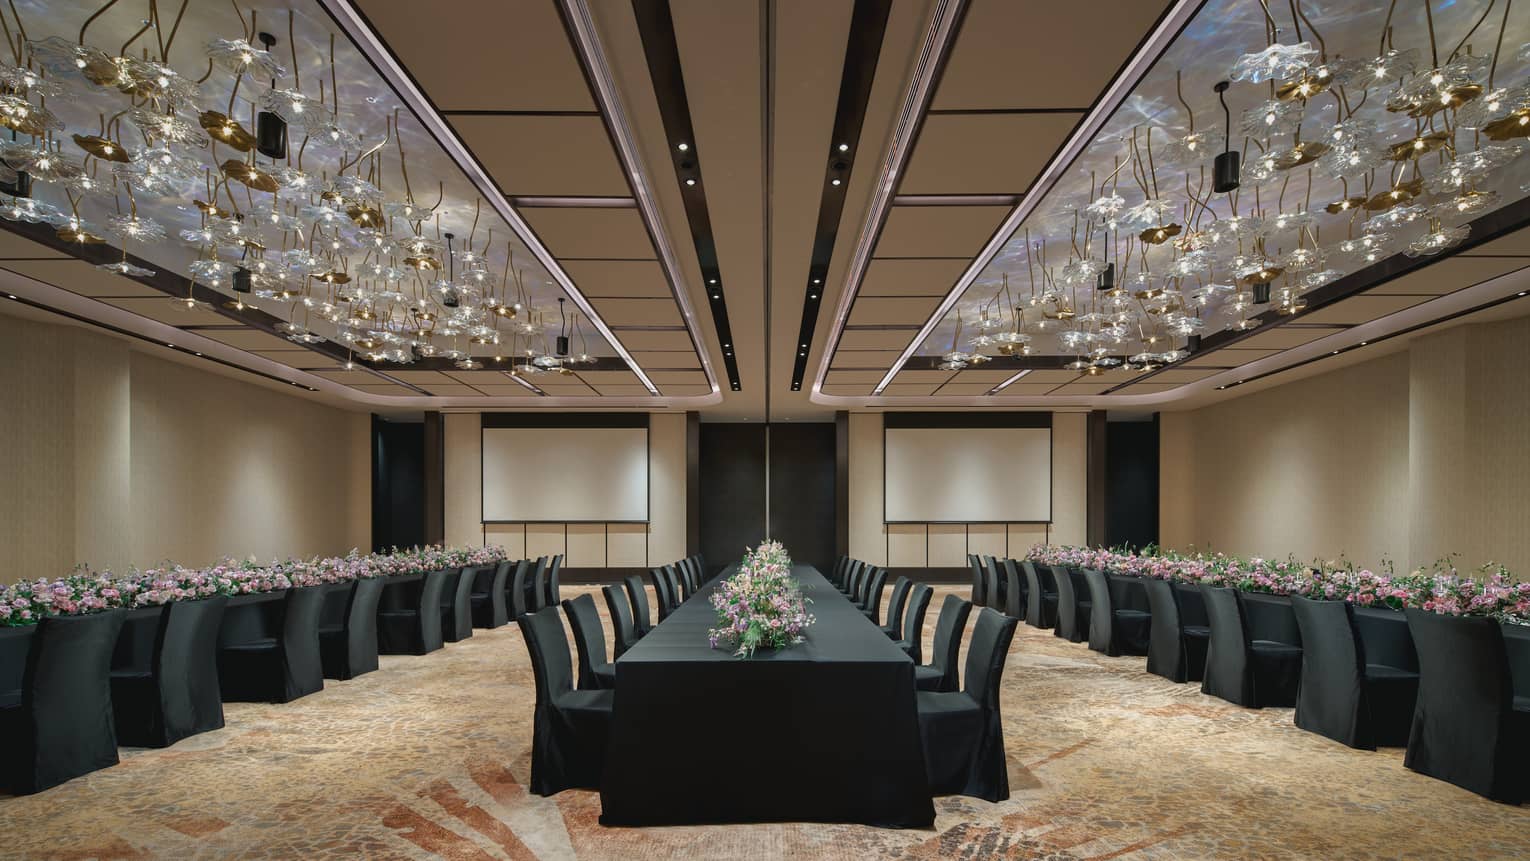 Event venue with three long tables